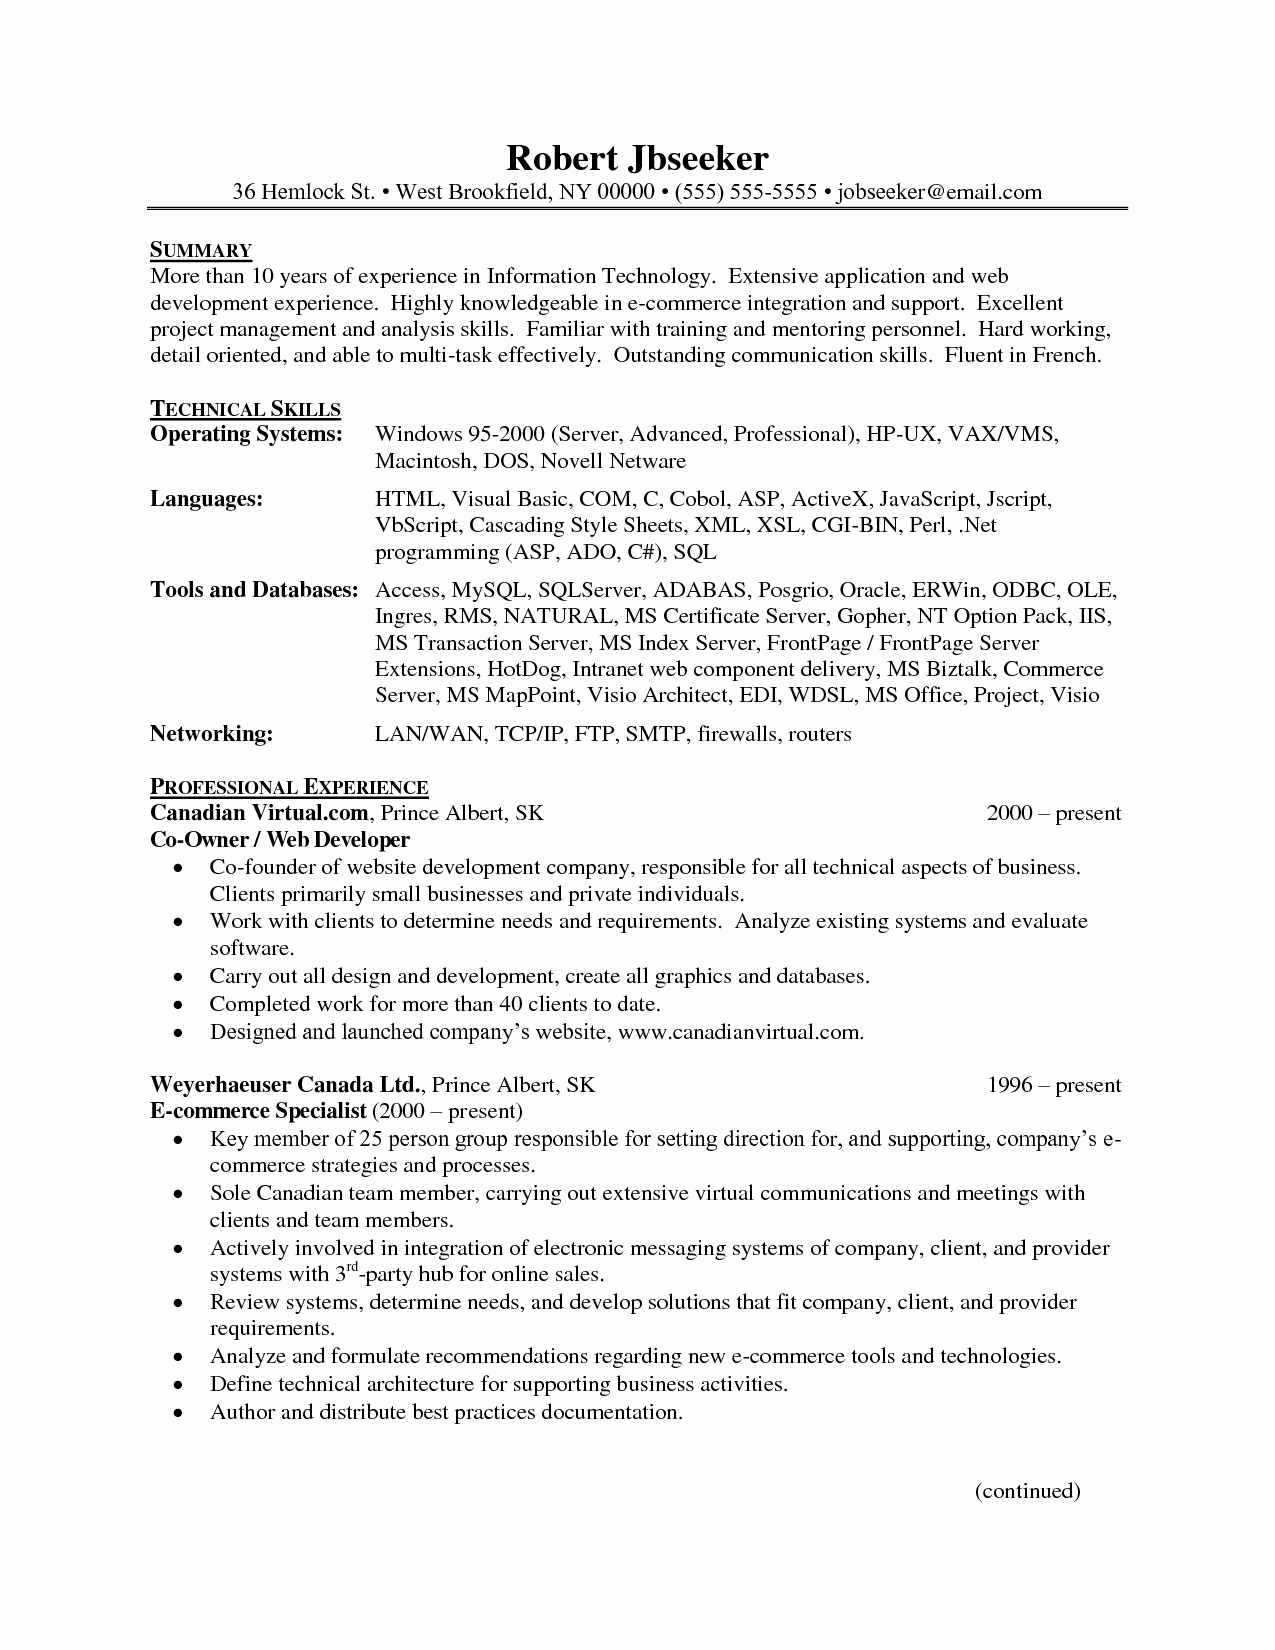 Resume Format 8 Year Experience 